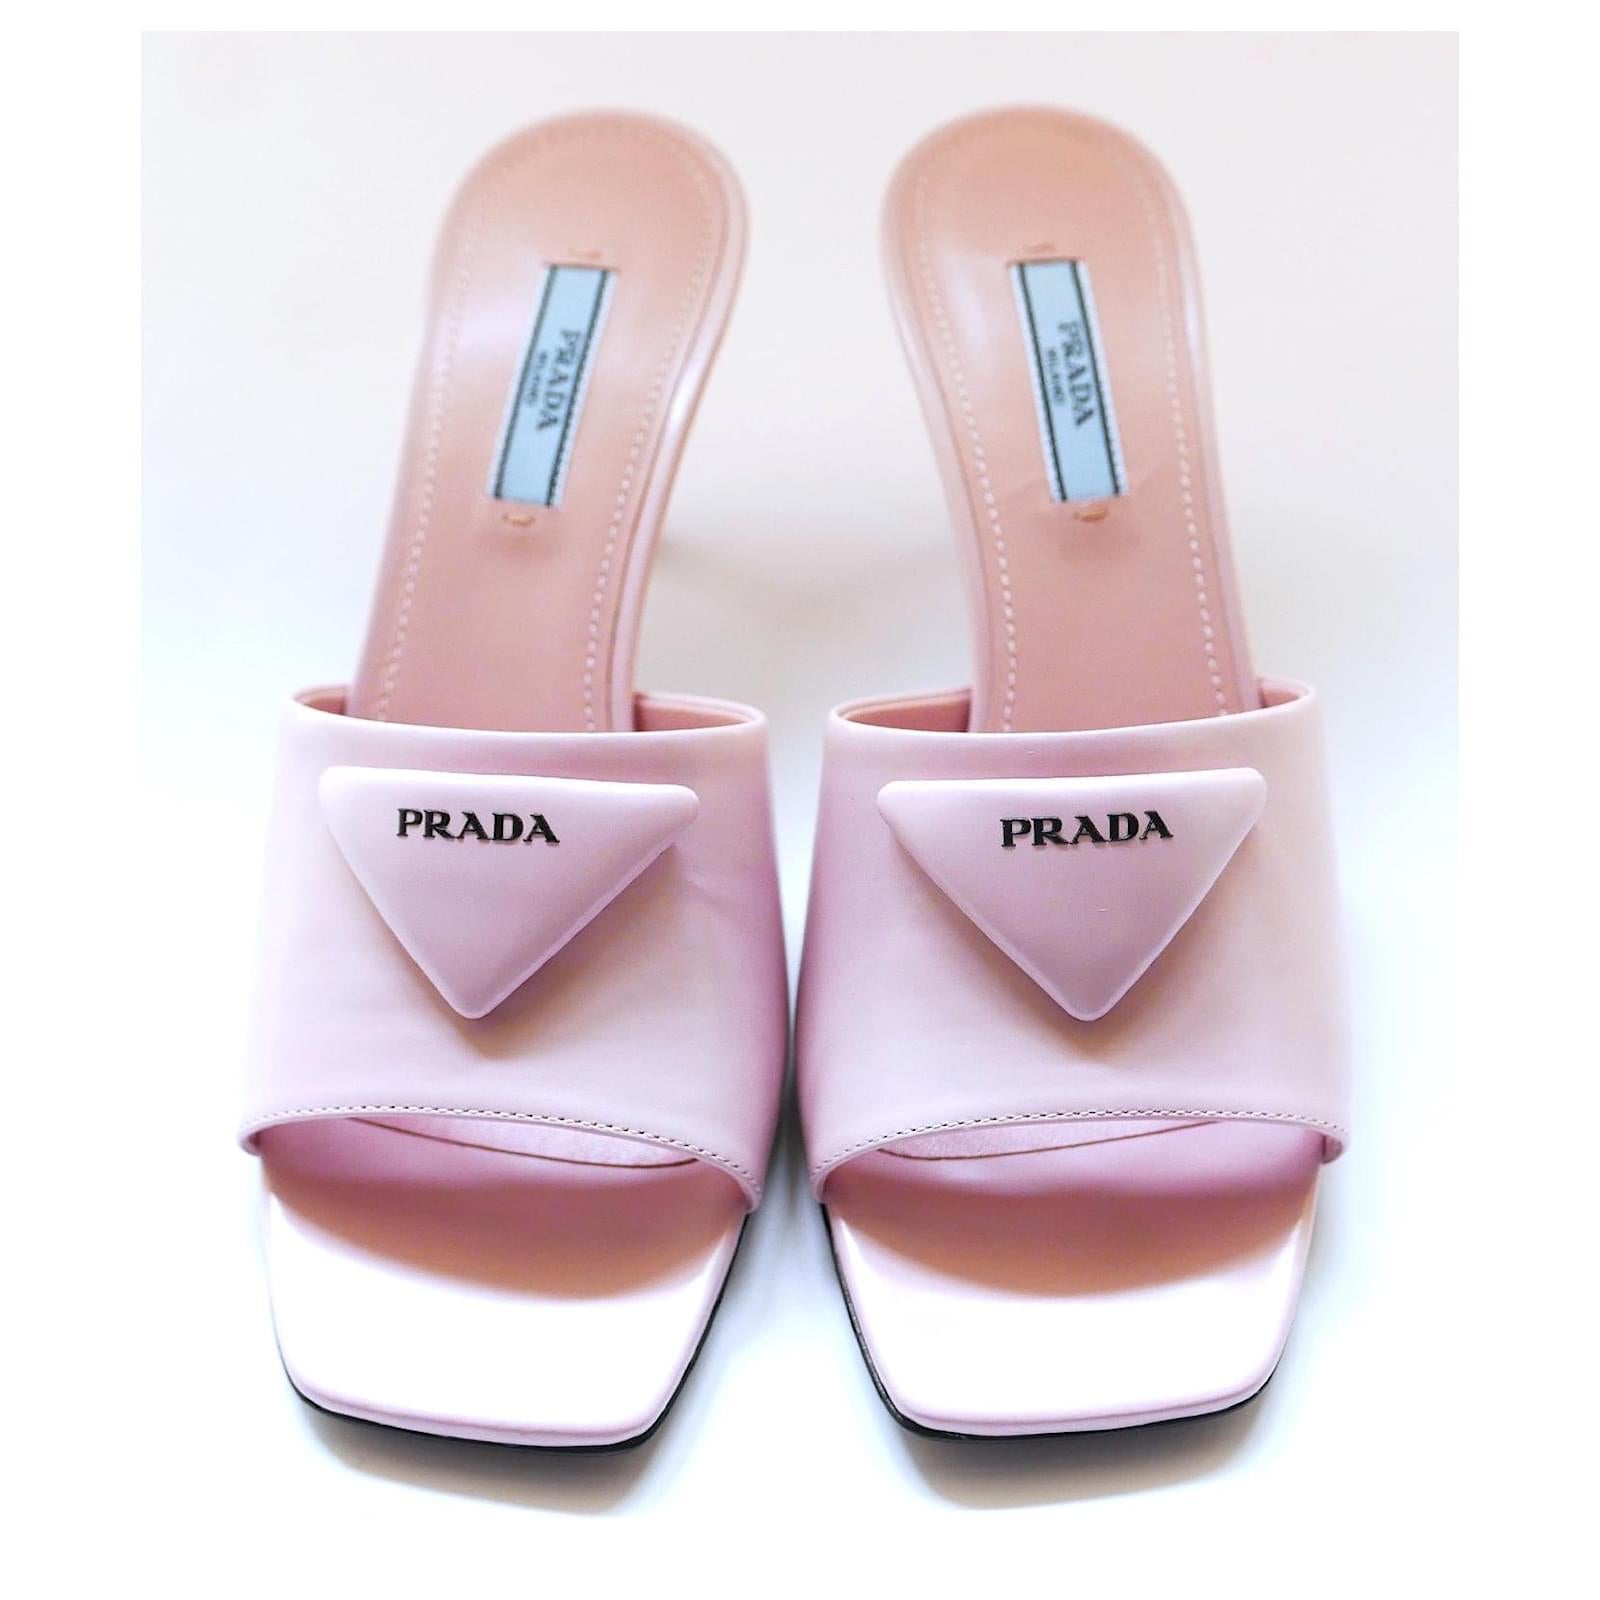 Barbie-esque Prada 75 Triangle Logo mules. Current collection - bought for £830 and new with box, dustbags and care leaflet in envelope. Made from Alabastro pink leather, they have a sleek 90s inspired shape with triangle logo badge and 75mm kitten